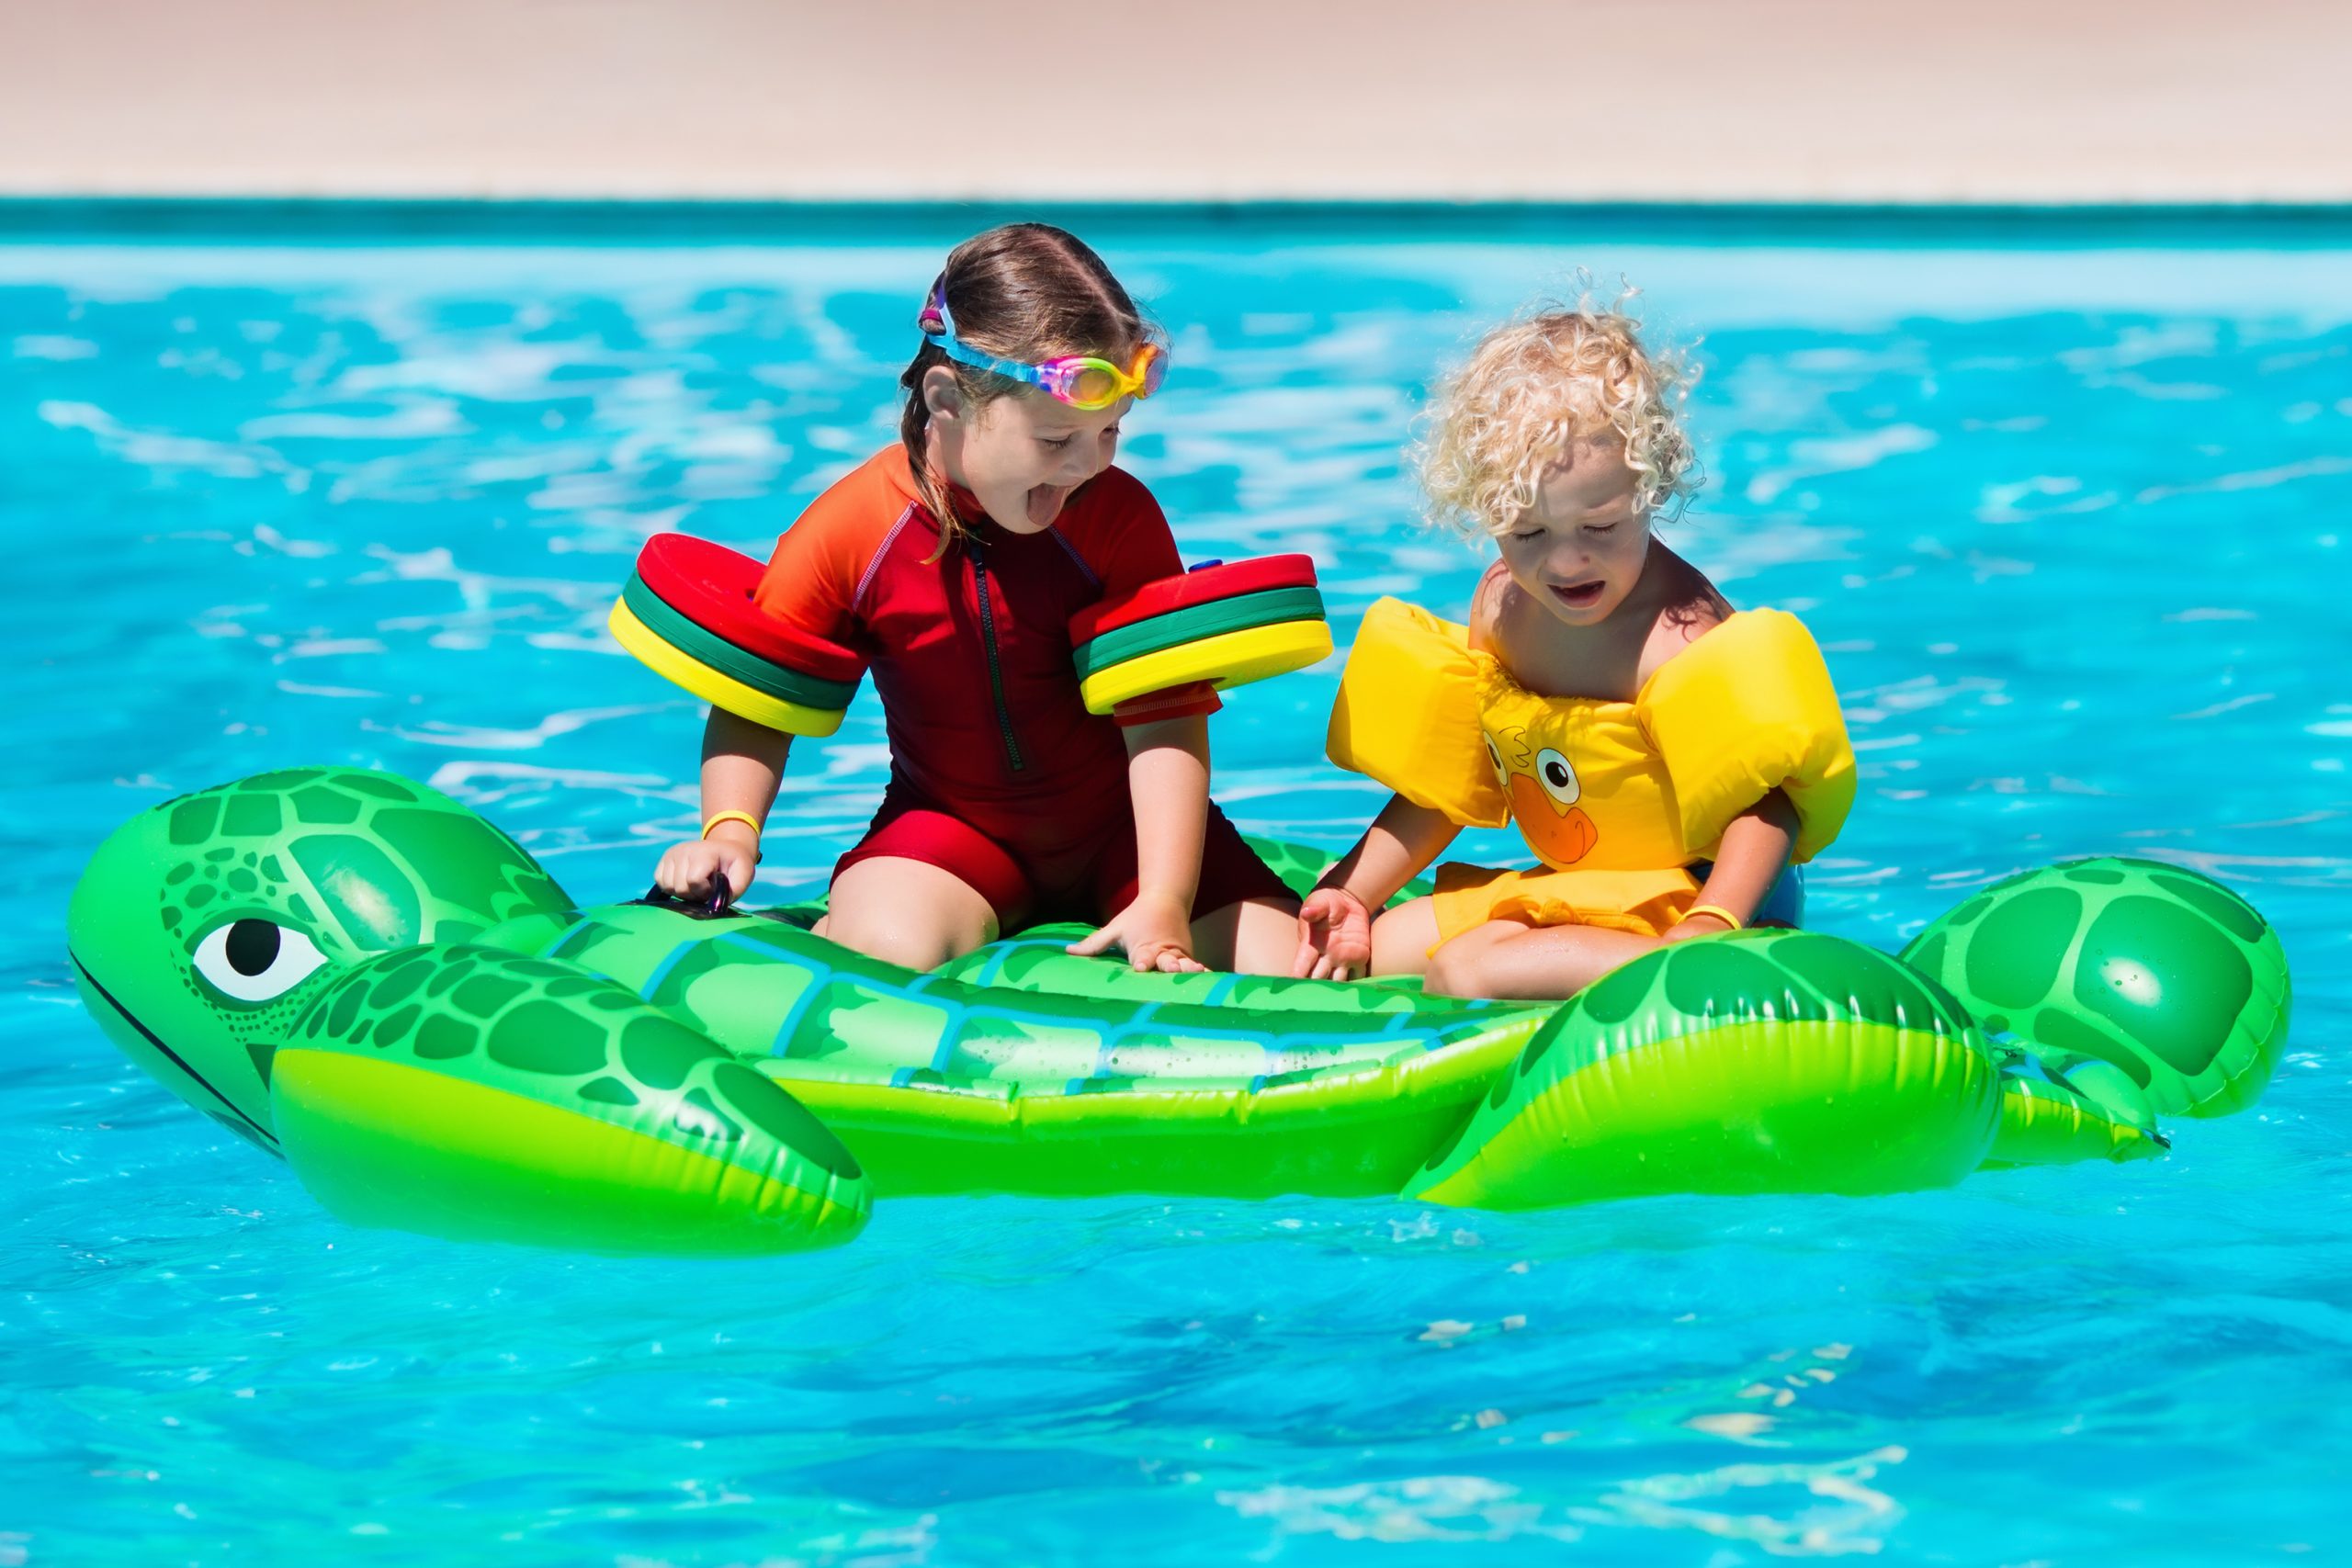 Prevent Dry Drowning with Pool Safety Tips